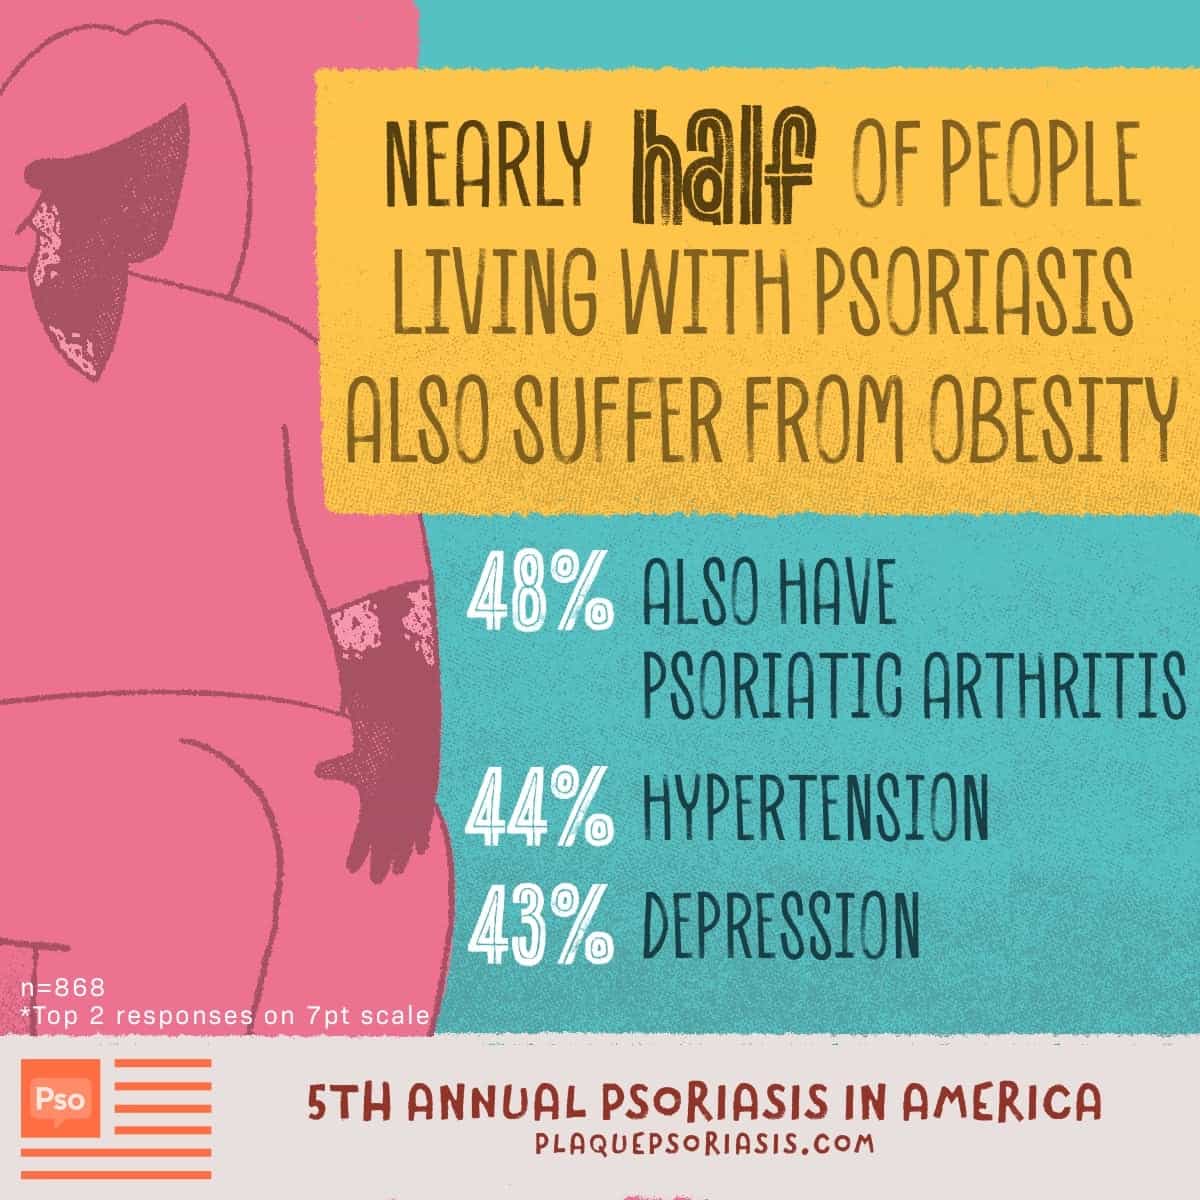 An image of an overweight female to depict the comorbidity of psoriasis.